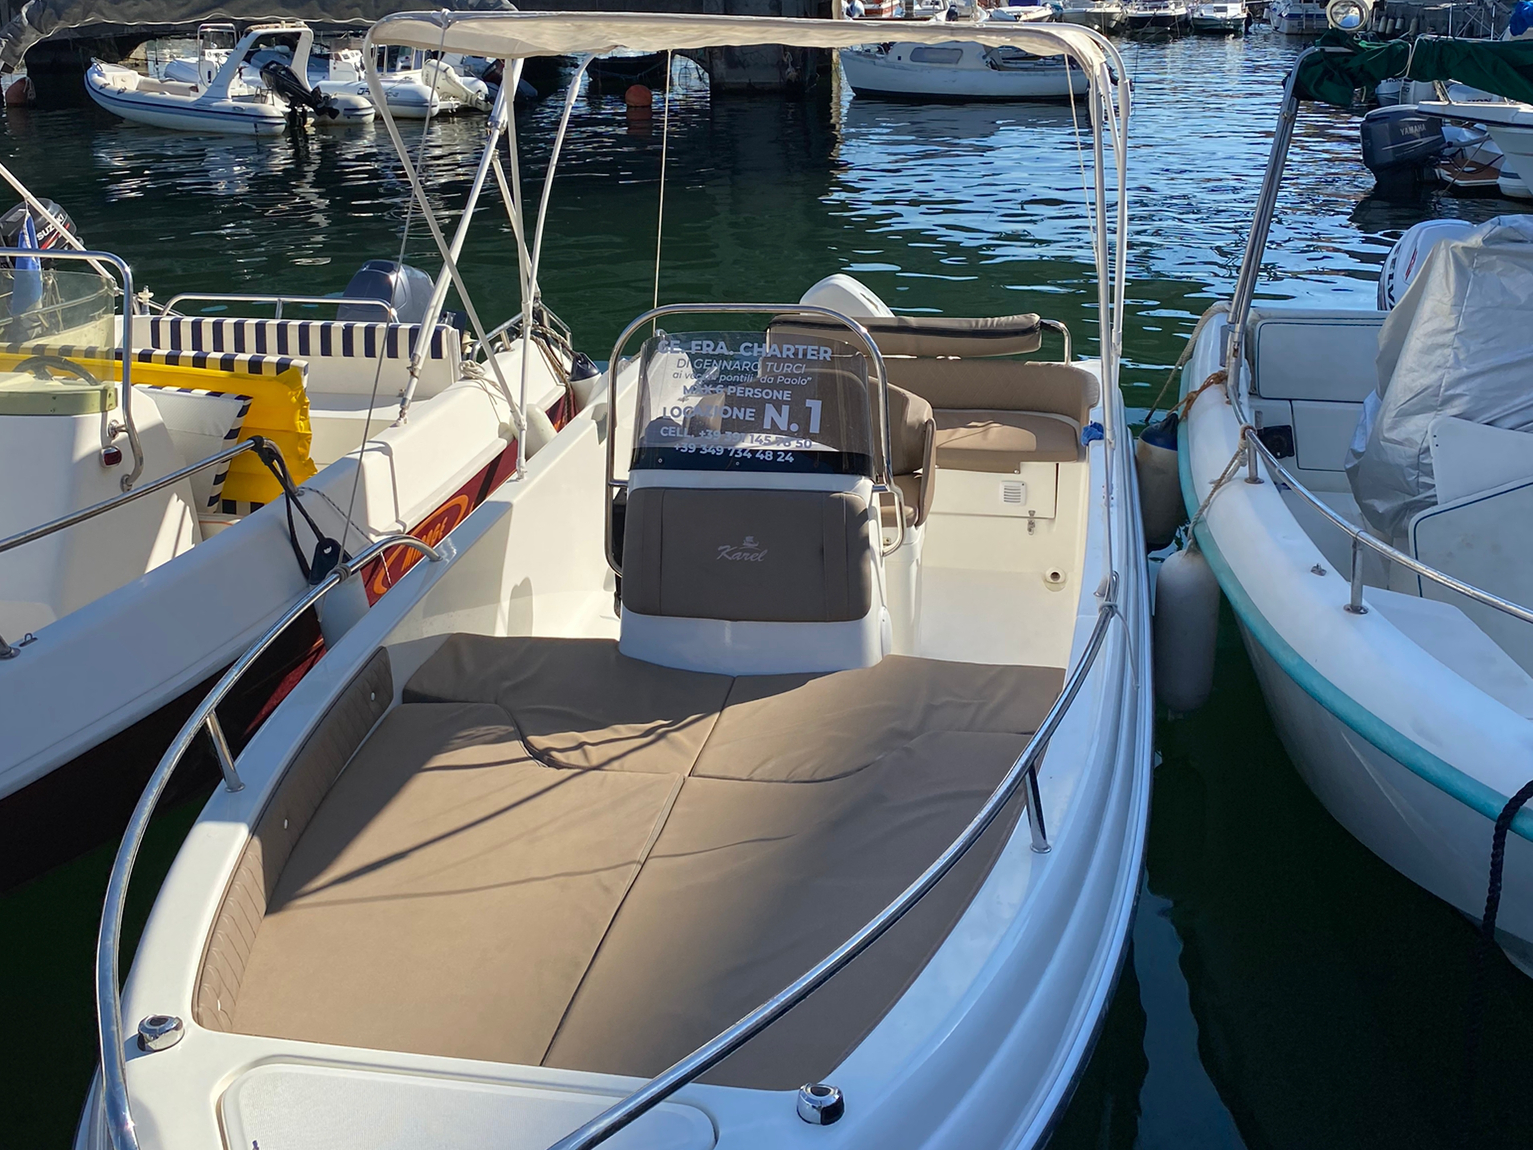 Ithaca 550 - Yacht Charter Castellammare di Stabia & Boat hire in Italy Campania Bay of Naples Castellammare di Stabia Porto di Castellammare di Stabia 5